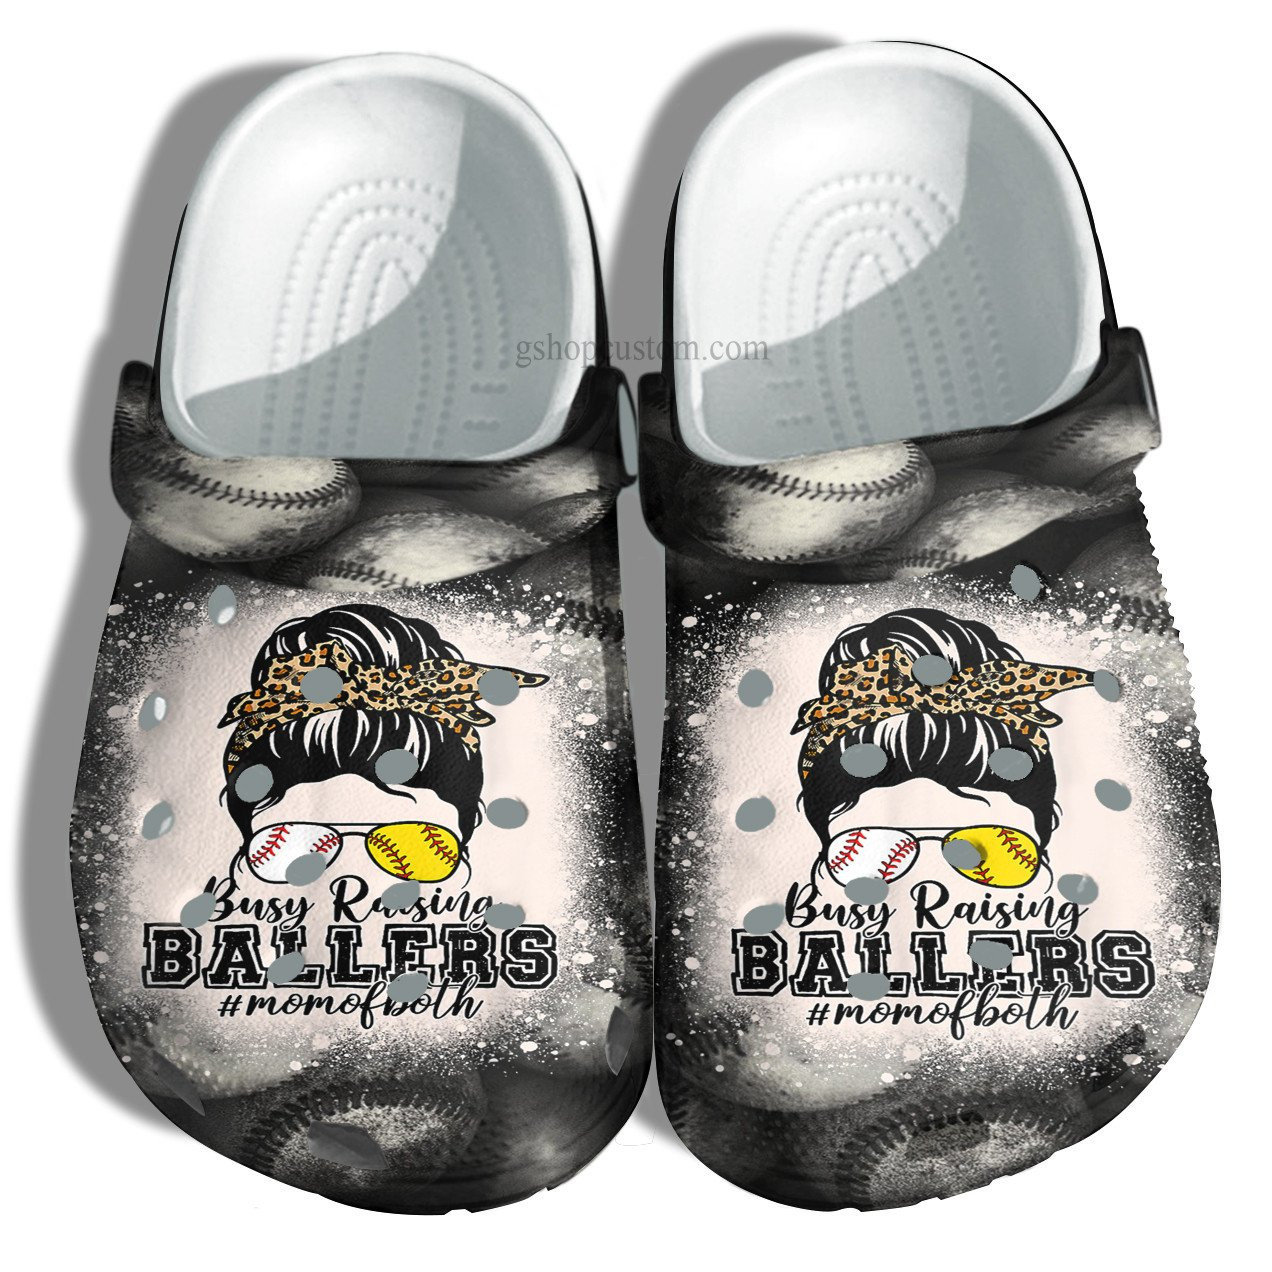 Baseball Mom Of Both Crocs Shoes For Mother Day - Baseball Mom Busy Raising Ballers Crocs Shoes Croc Clogs